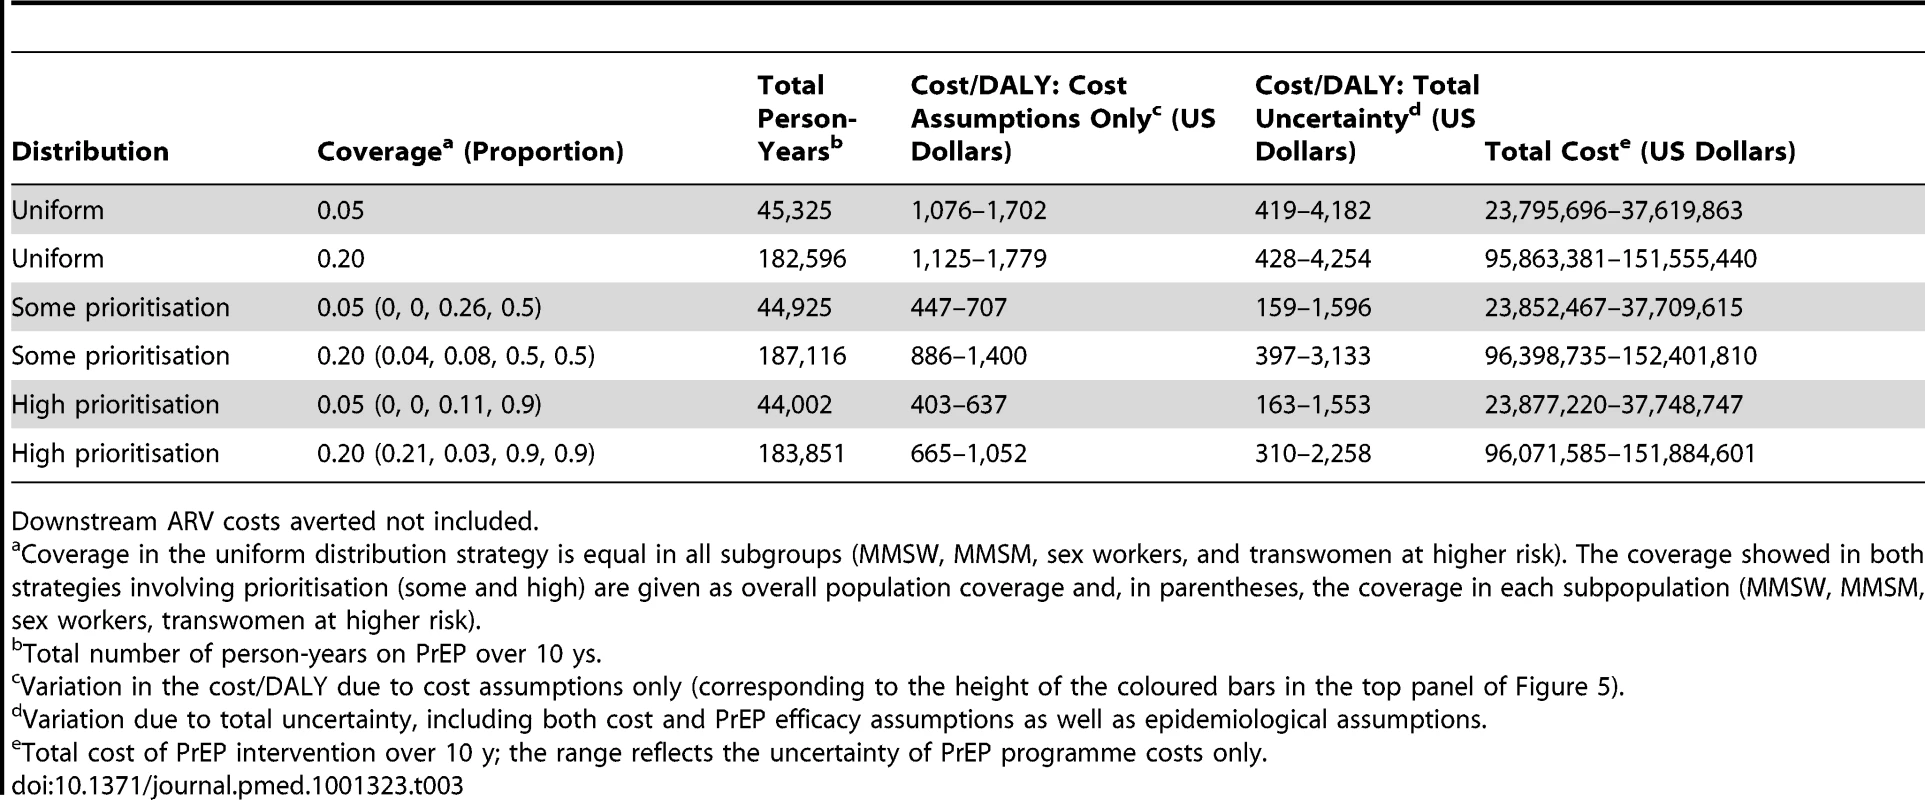 Cost-effectiveness and total cost of PrEP over 10 y.